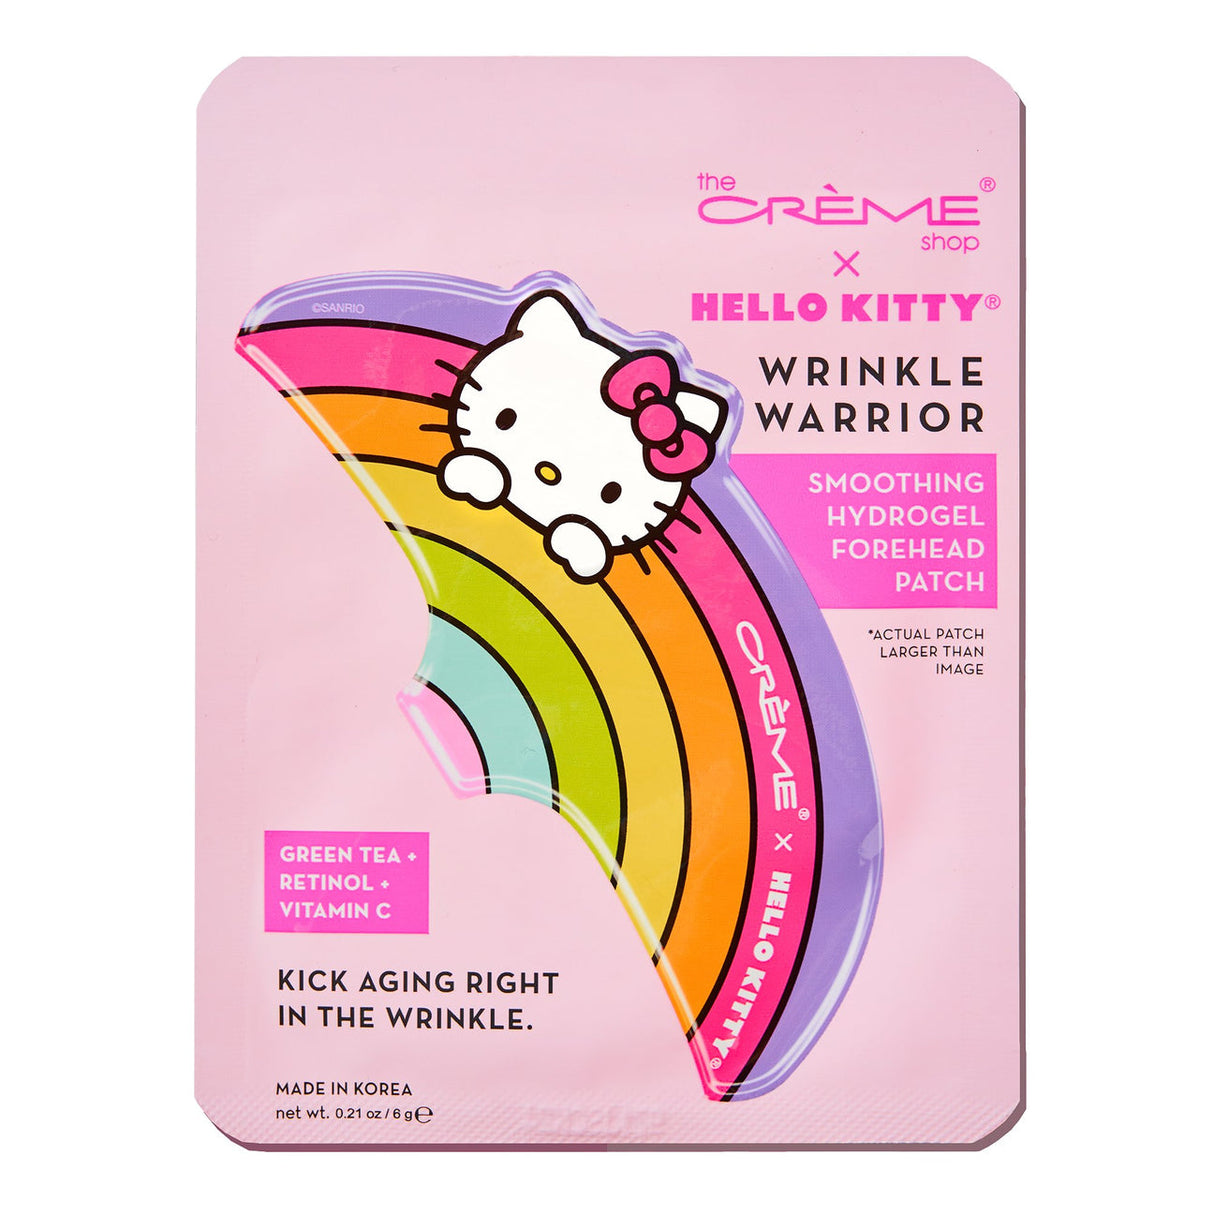 THE CREME SHOPHELLO KITTY- WRINKLE WARRIOR SMOOTHING HYDROGEL FOREHEAD PATCH - 6 PCS